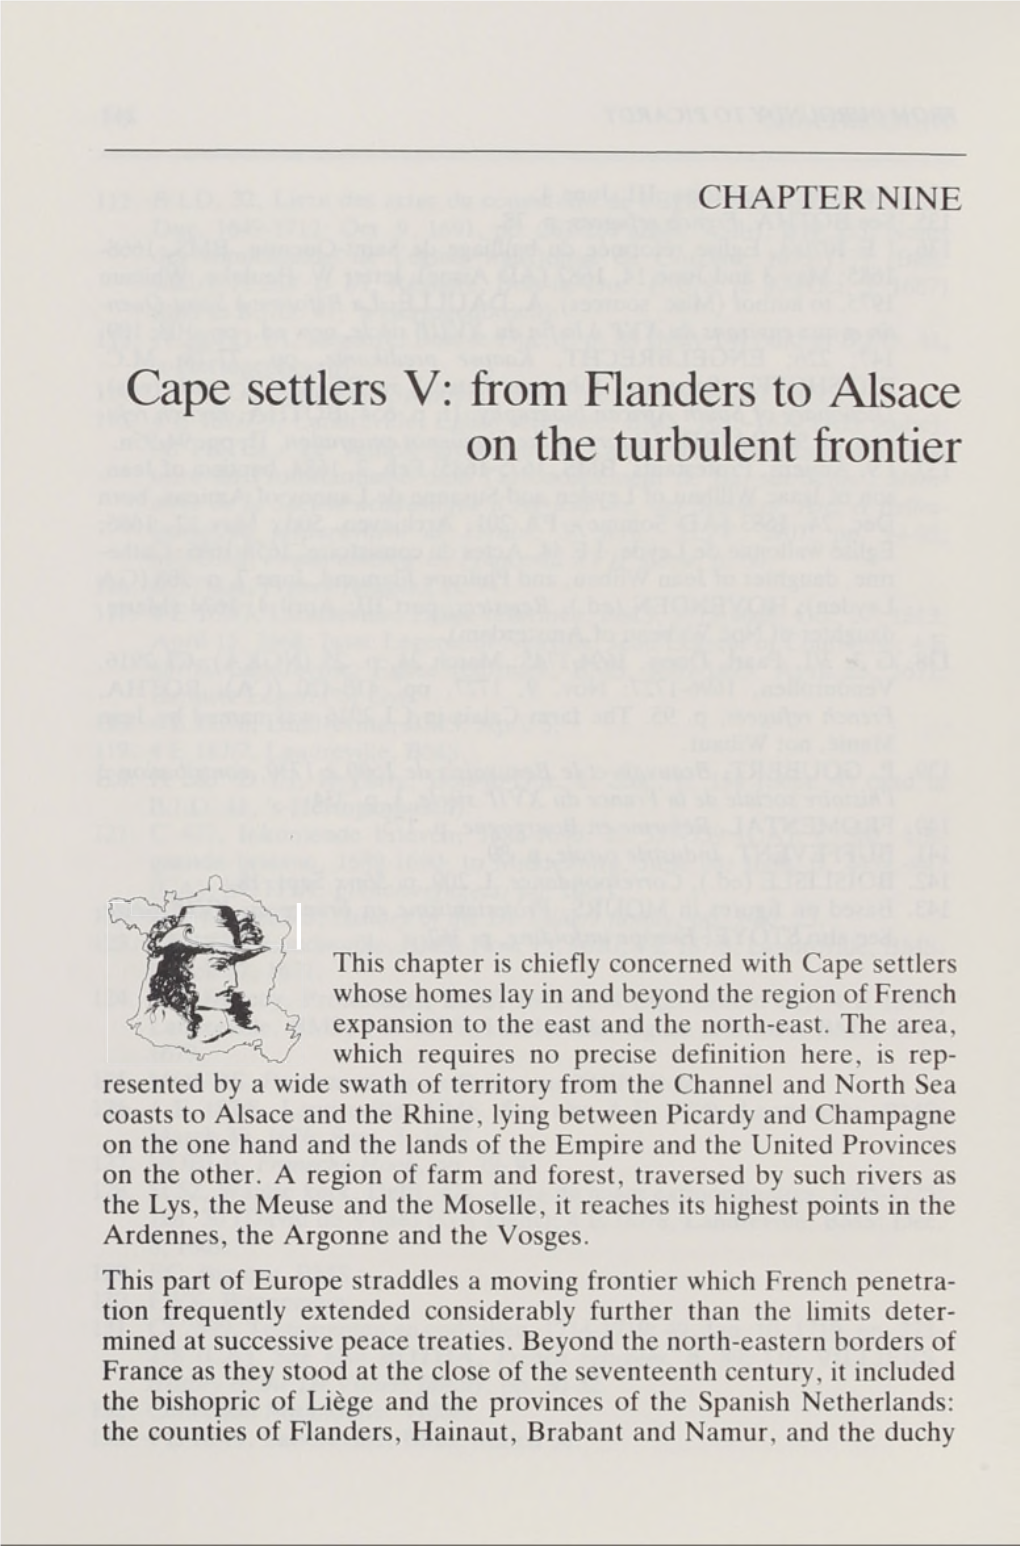 Cape Settlers V: from Flanders to Alsace on the Turbulent Frontier